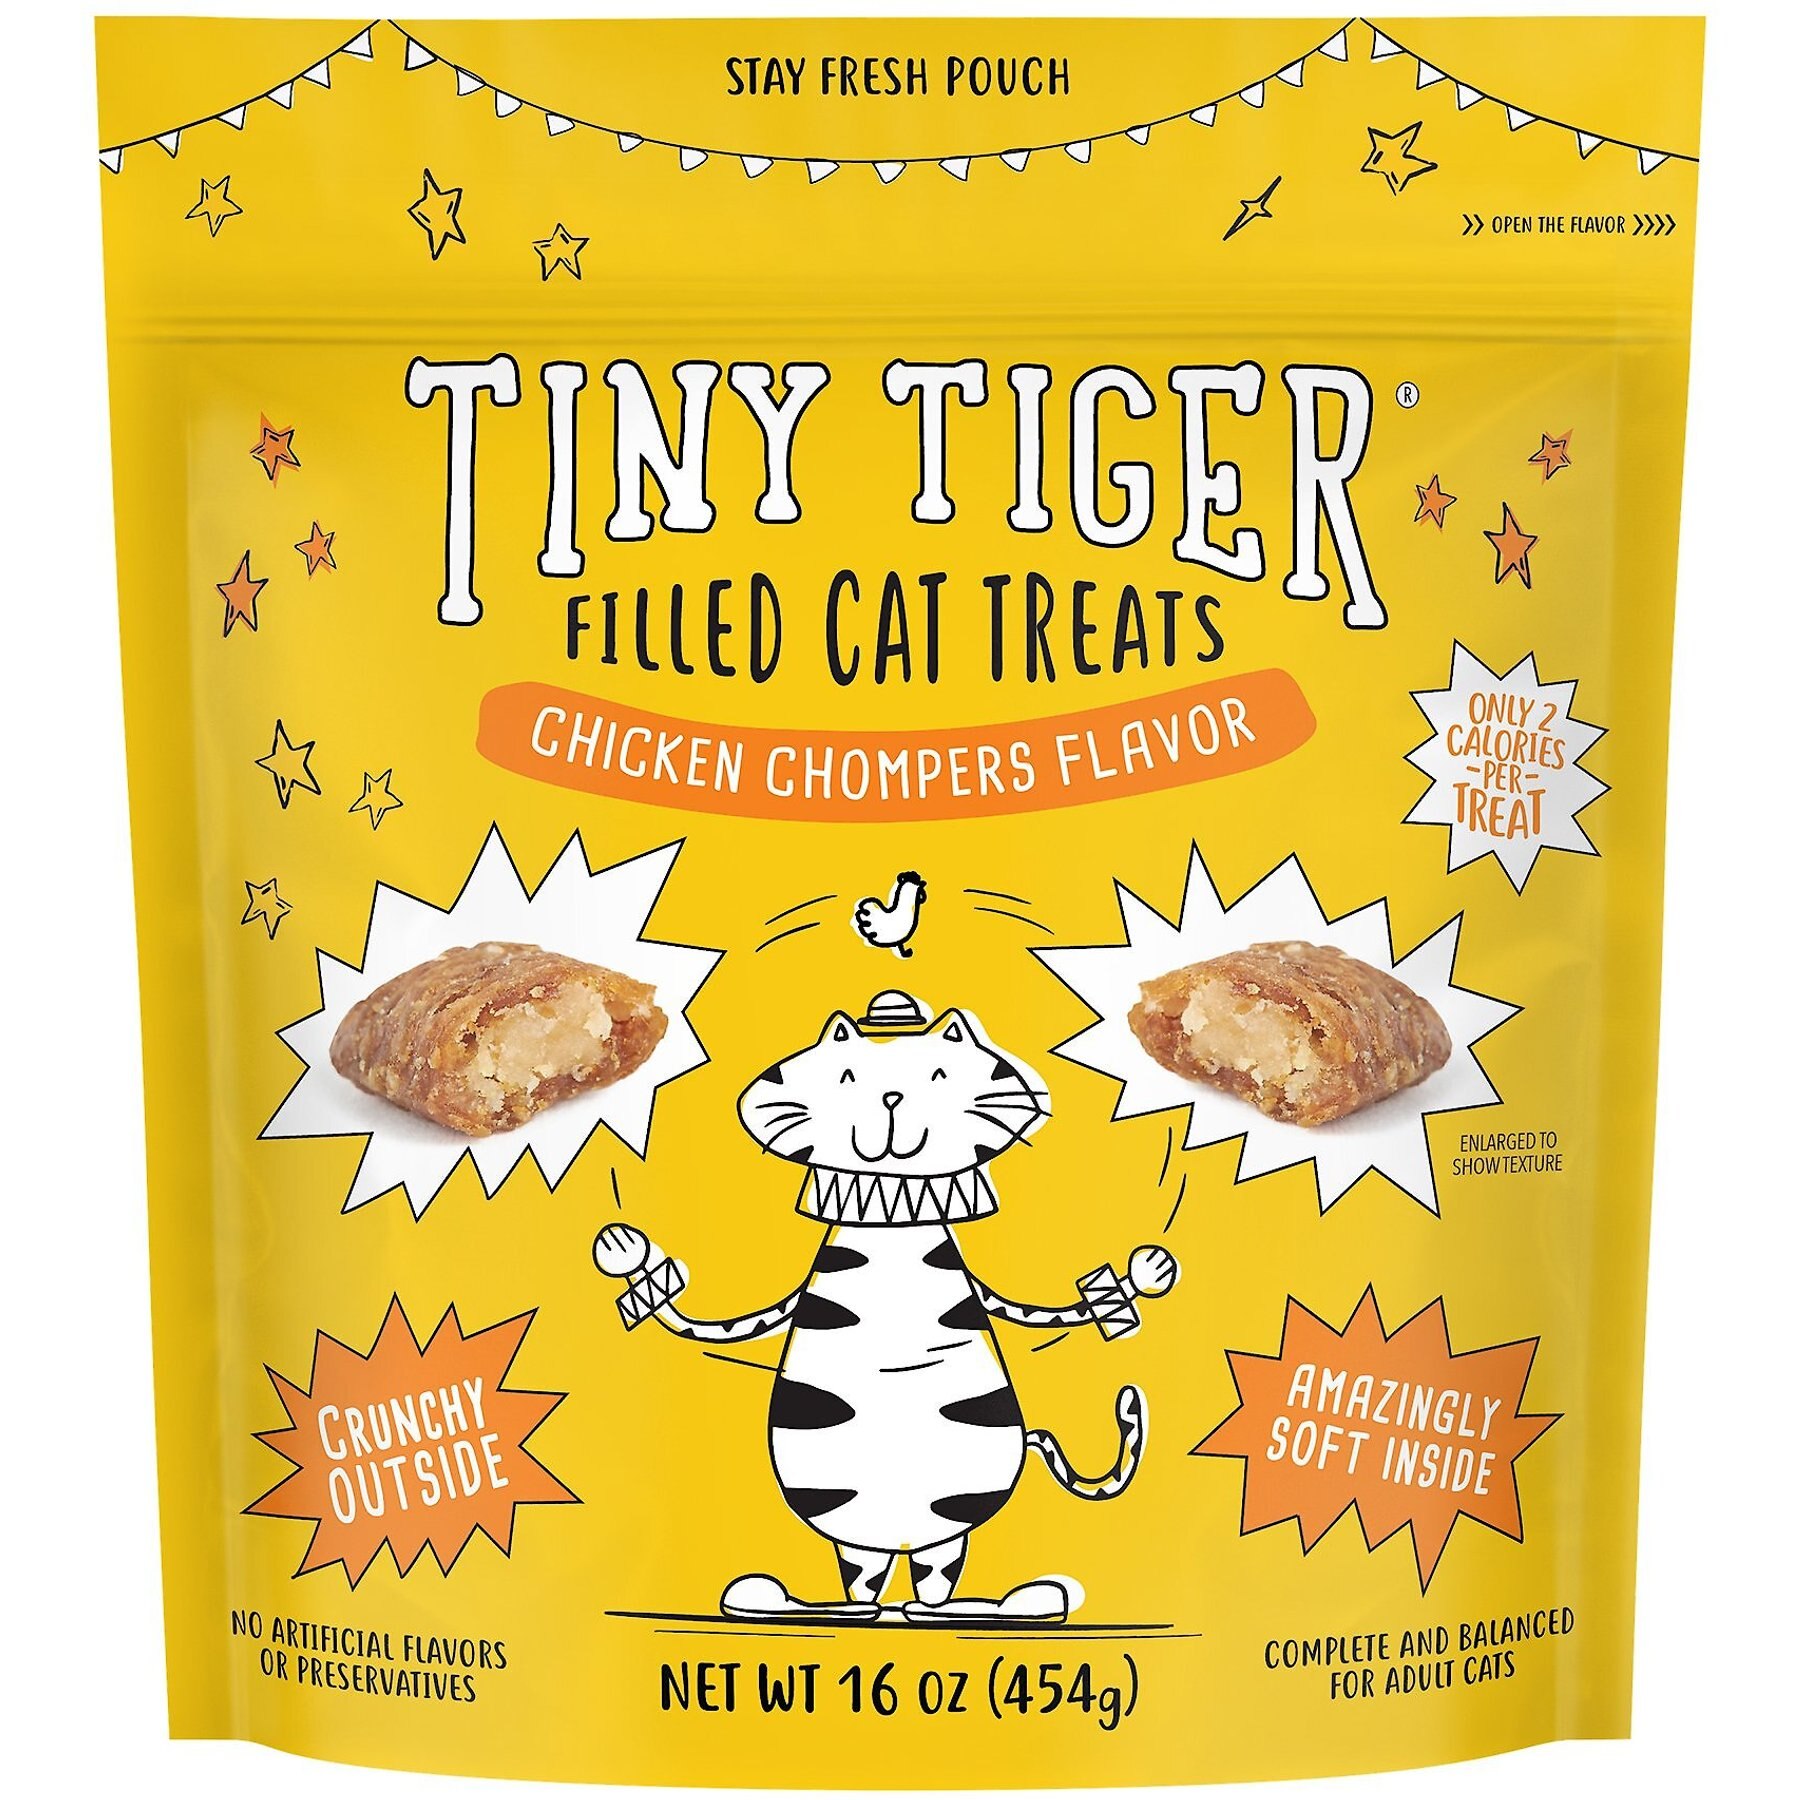 DIY Cool Cat Treats For The Dog Days of Summer - The Tiniest Tiger